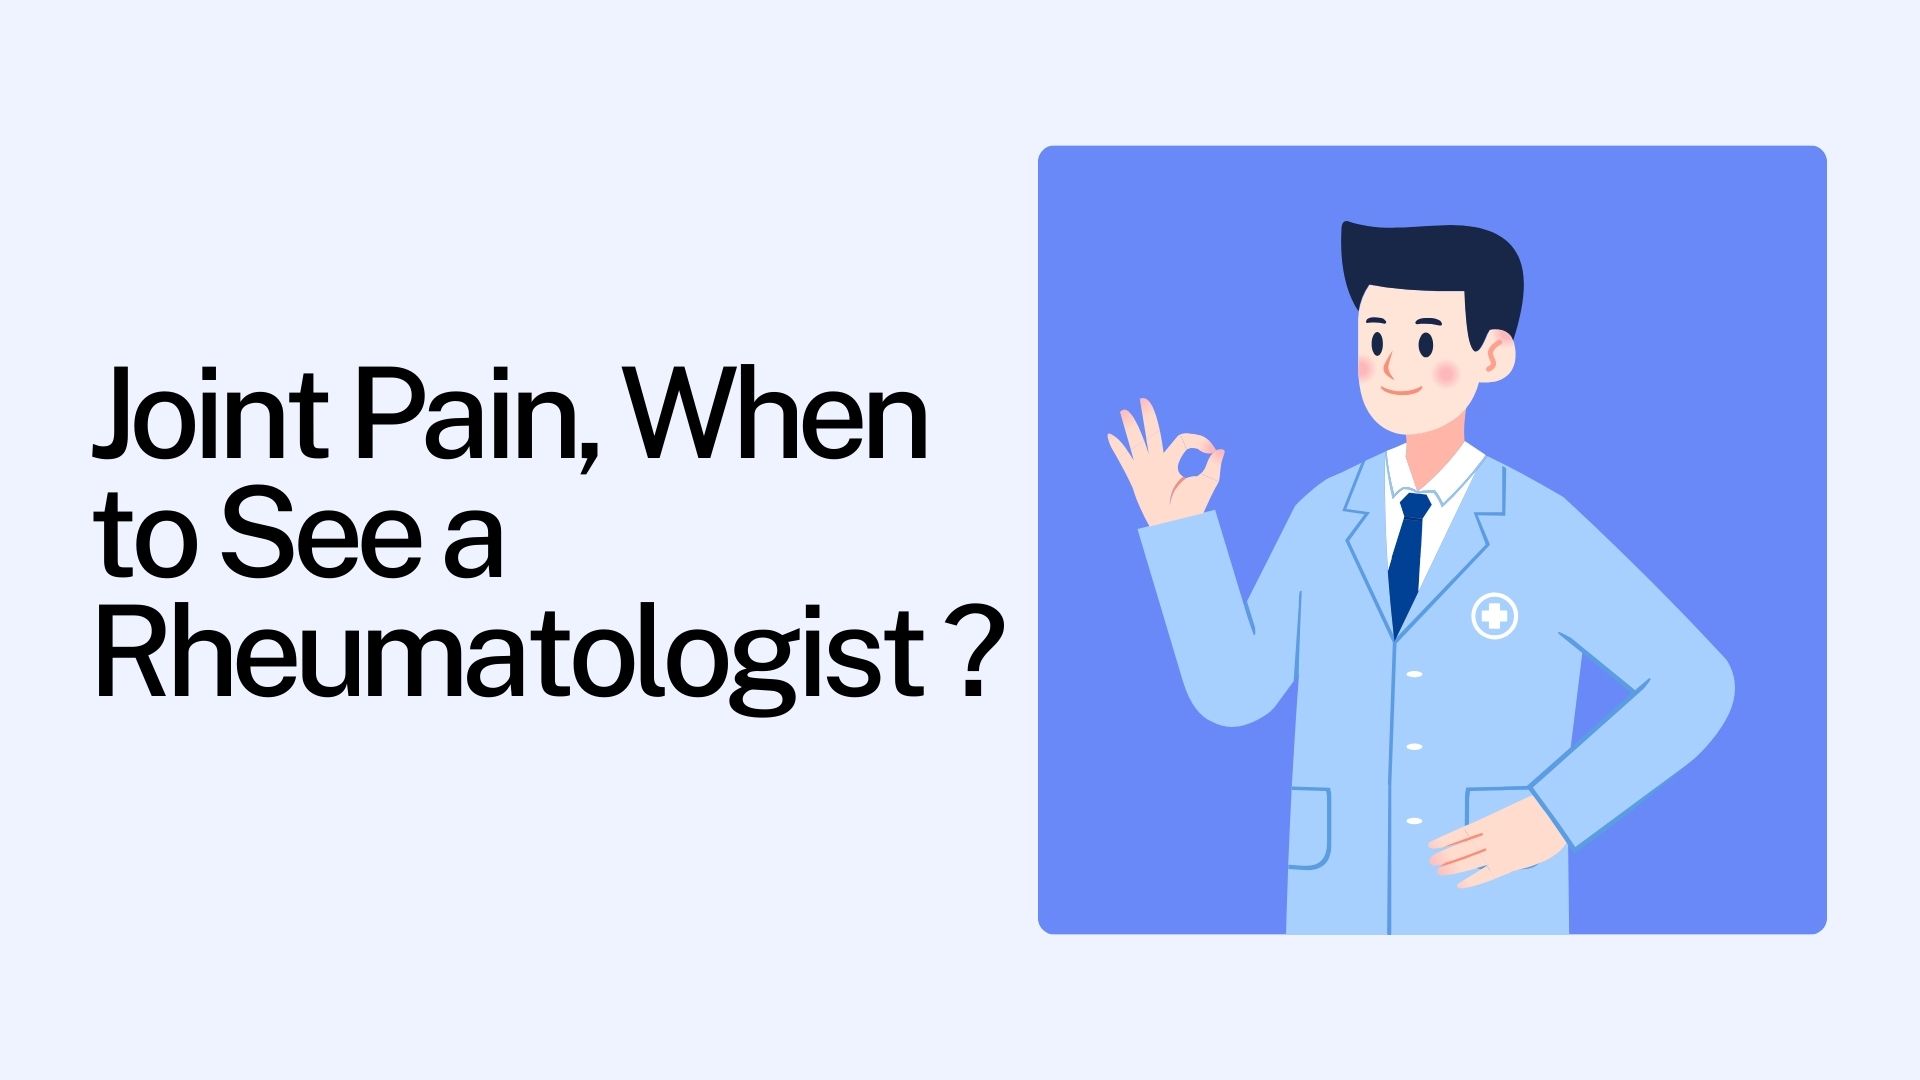 Joint Pain, When to See a Rheumatologist ?